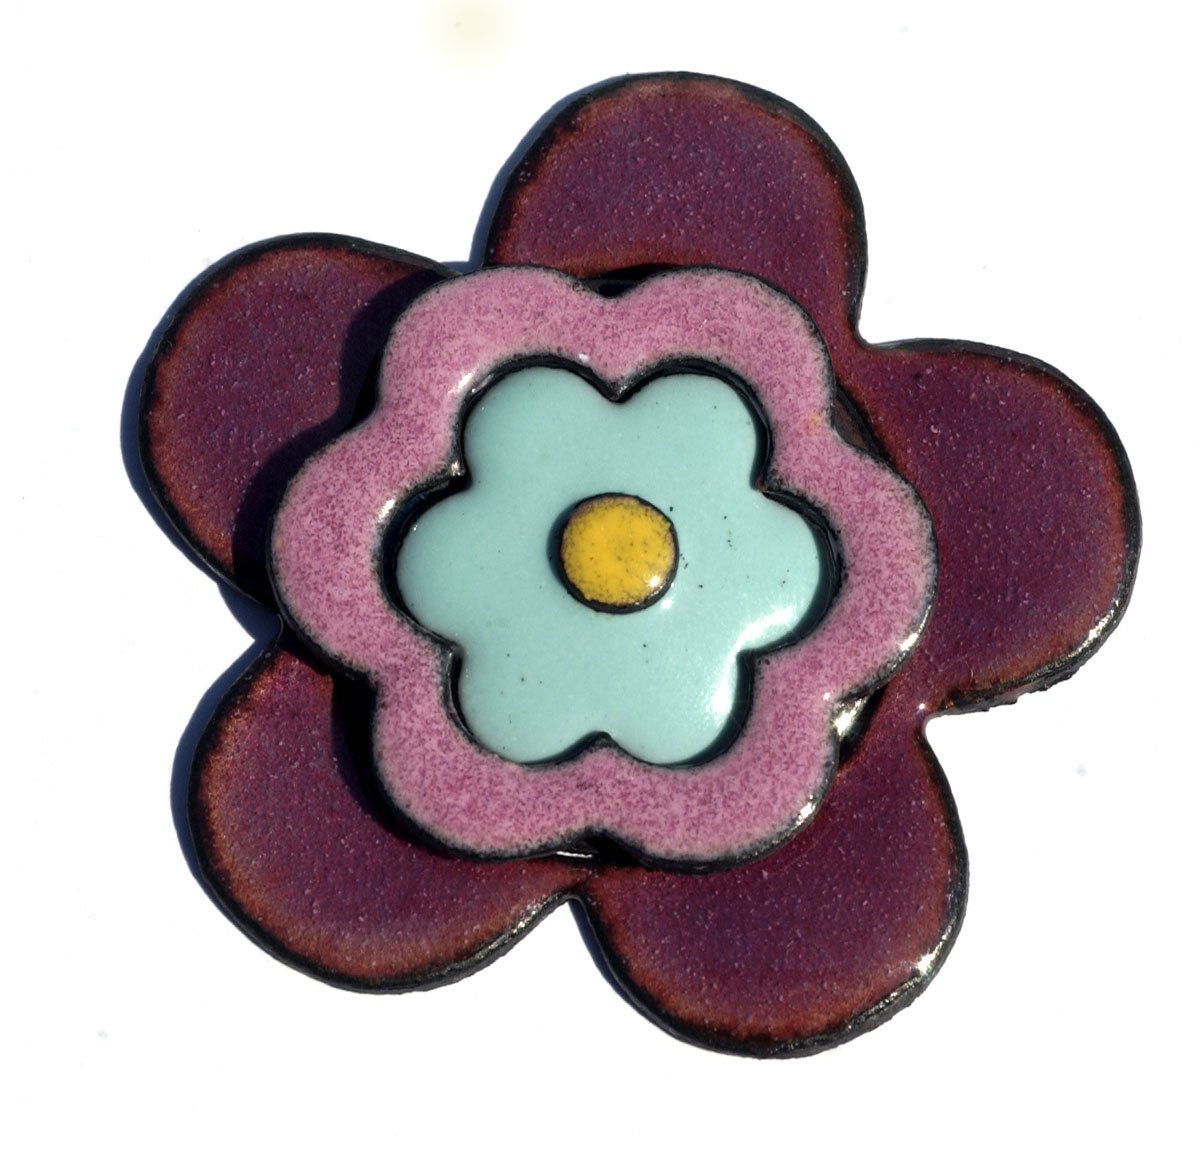 Heart  in Lotus Flower  Pattern Classic Shape 18mm x 15mm 20g Blanks Cutout for Enameling Stamping Texturing Variety of Metals 8 Pieces